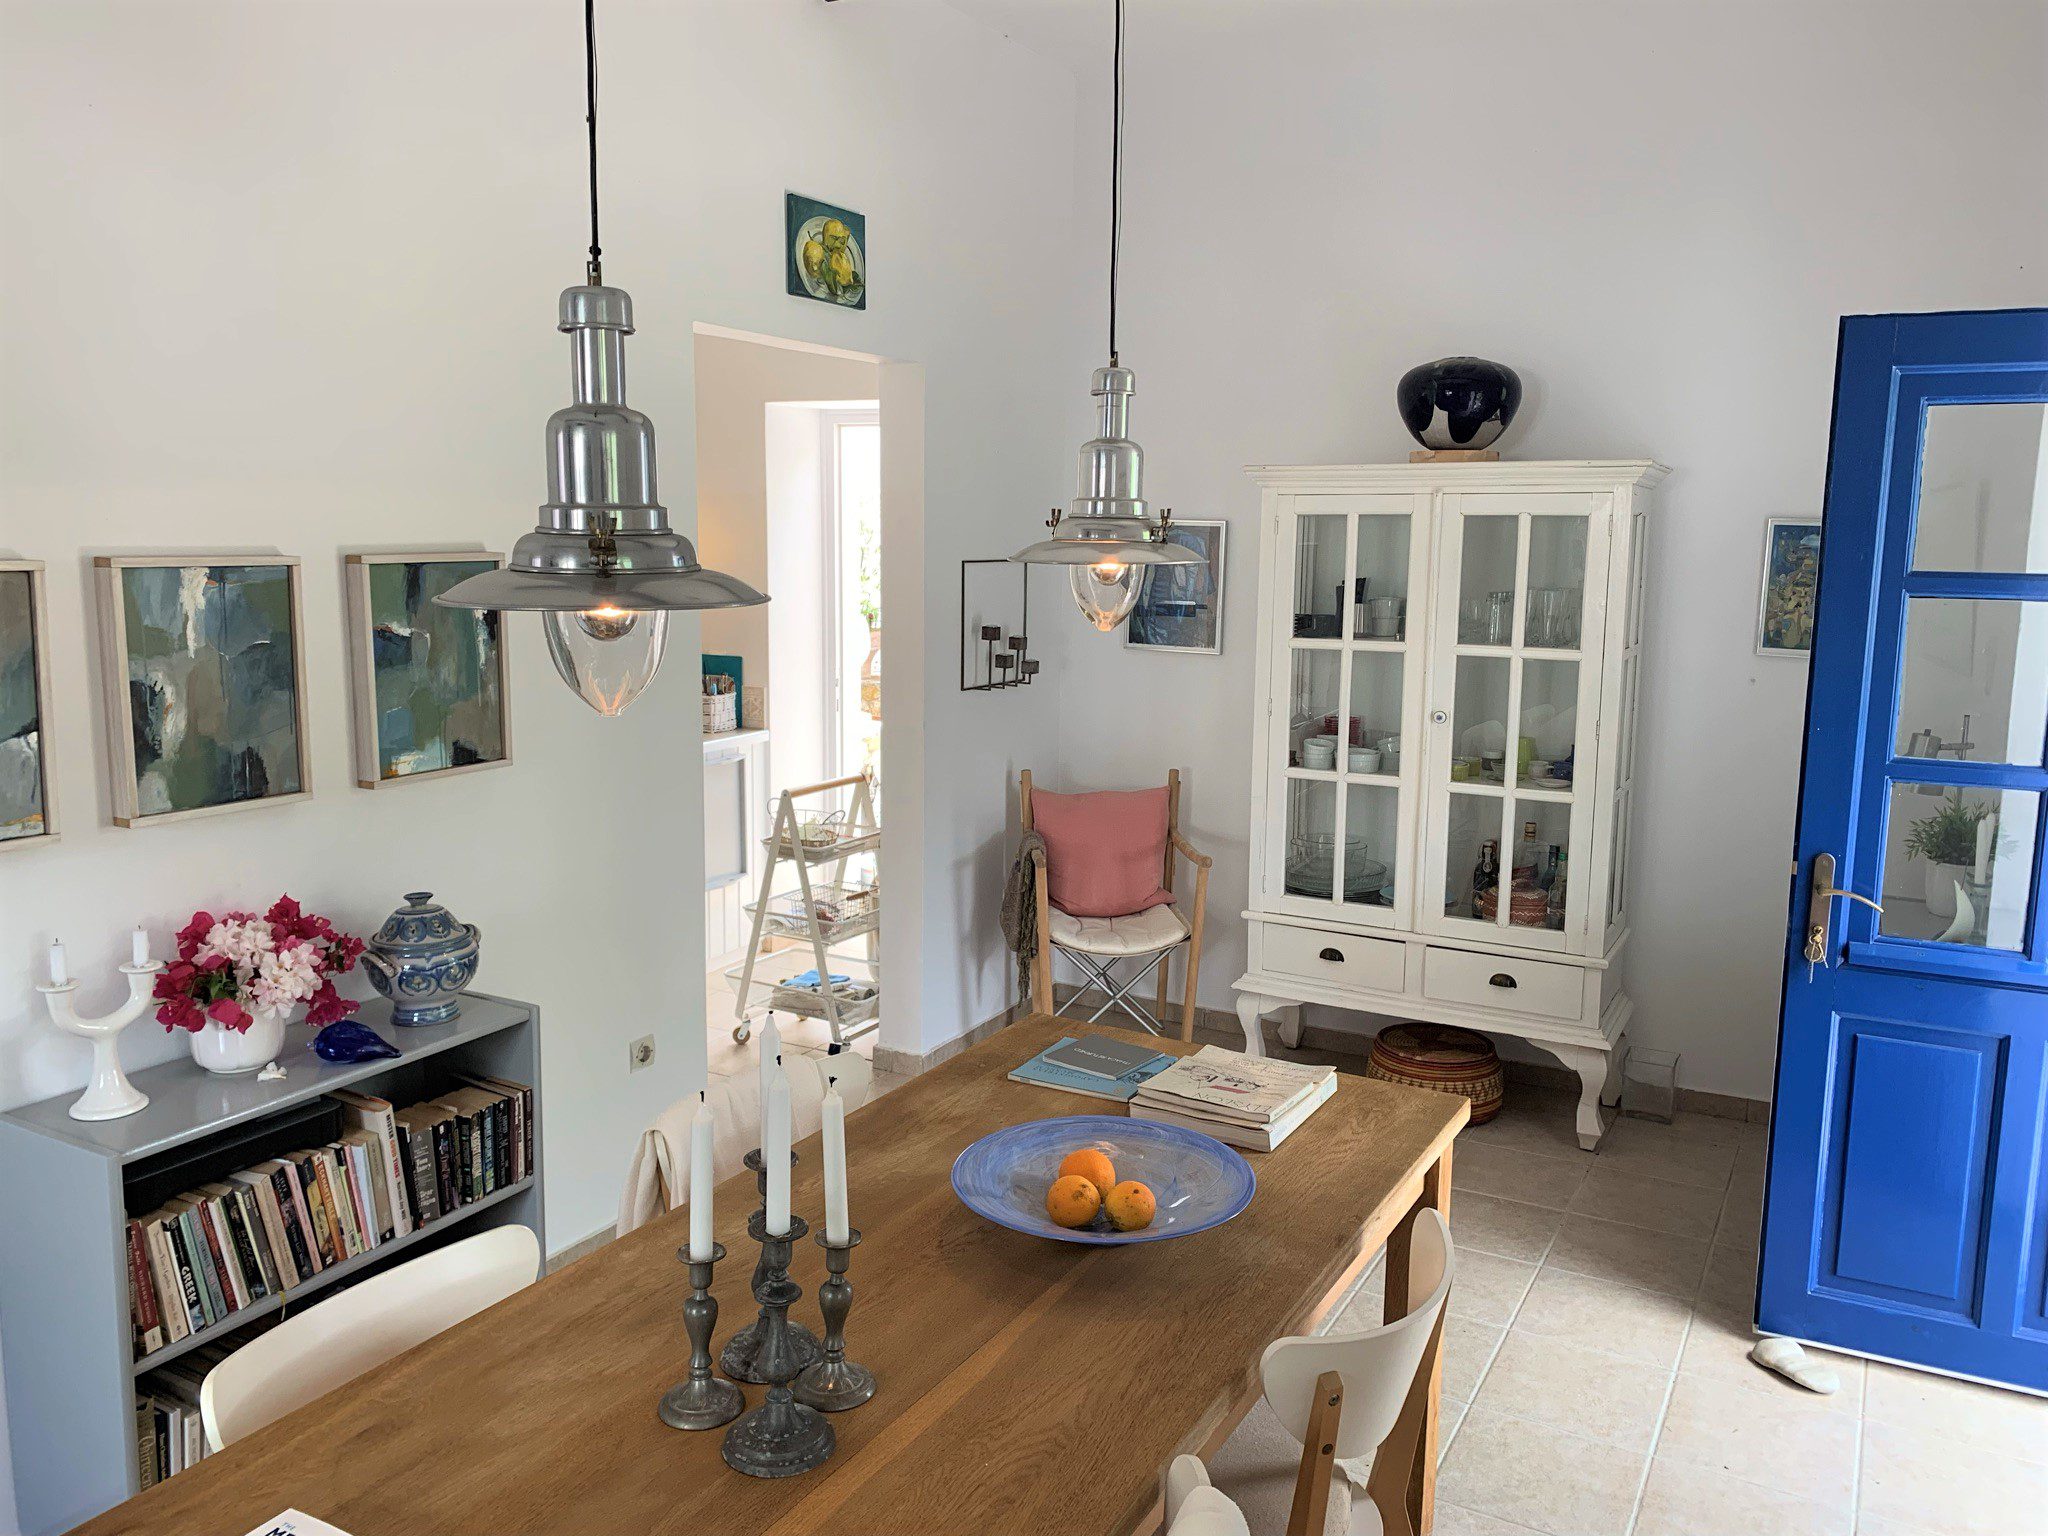 Living room of house for sale in Ithaca Greece, Vathi